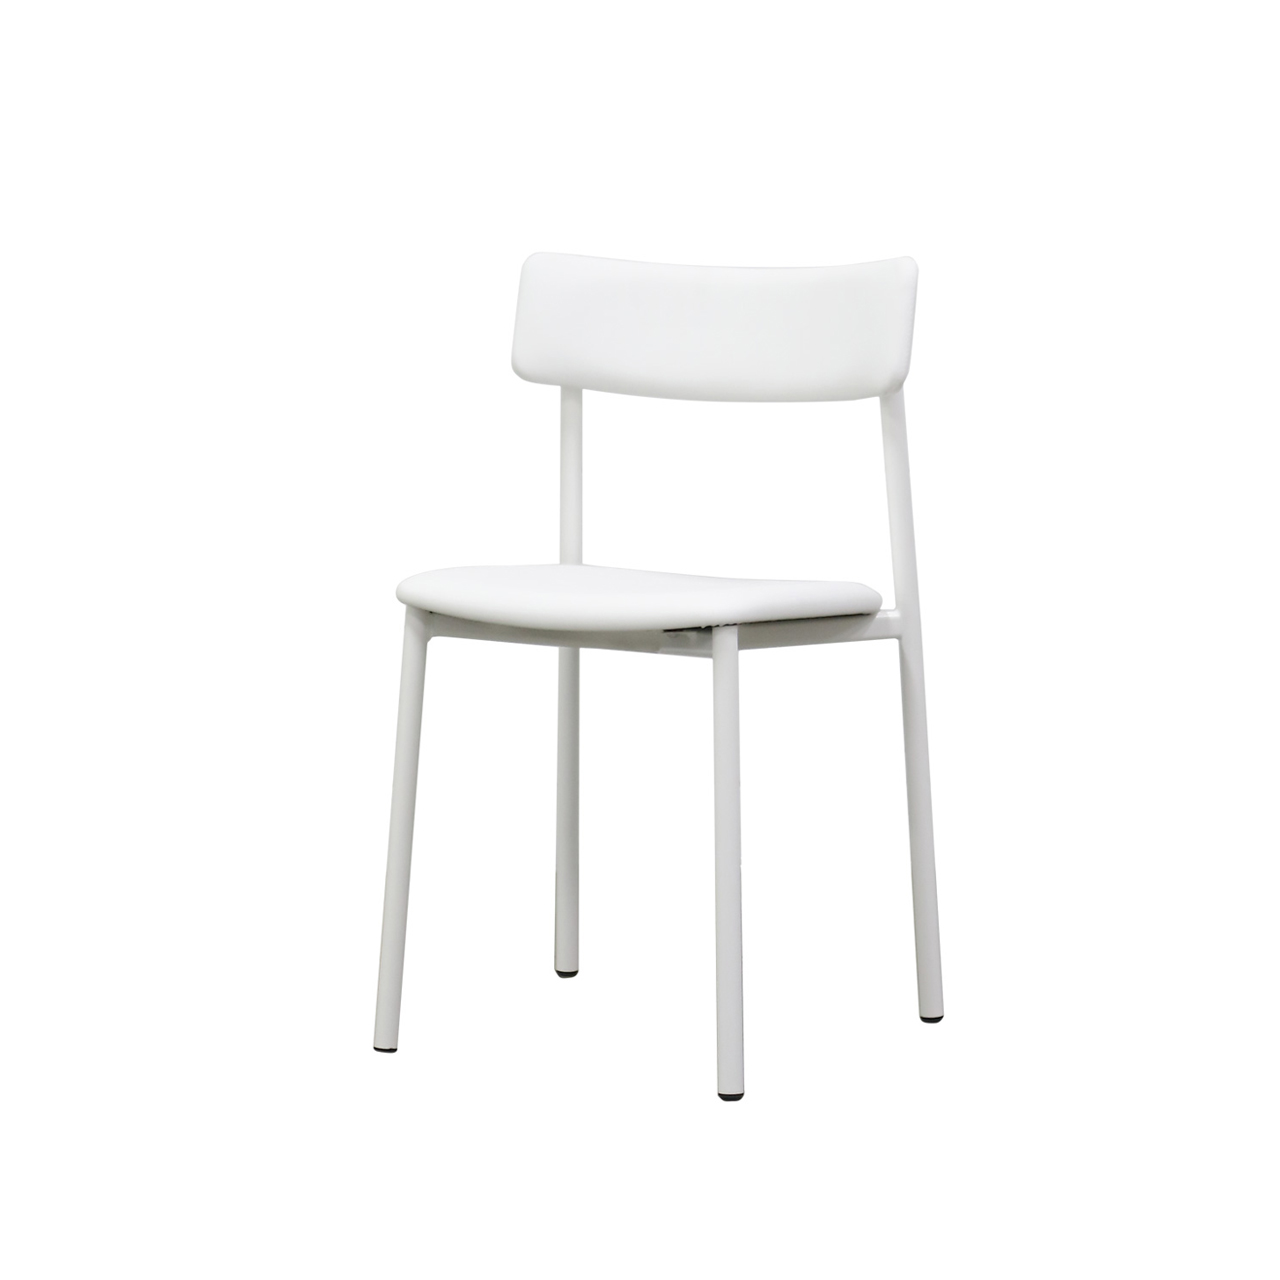 CONNUBIA BY CALLIGARISUP CHAIR  업 체어 (화이트)MADE IN ITALY